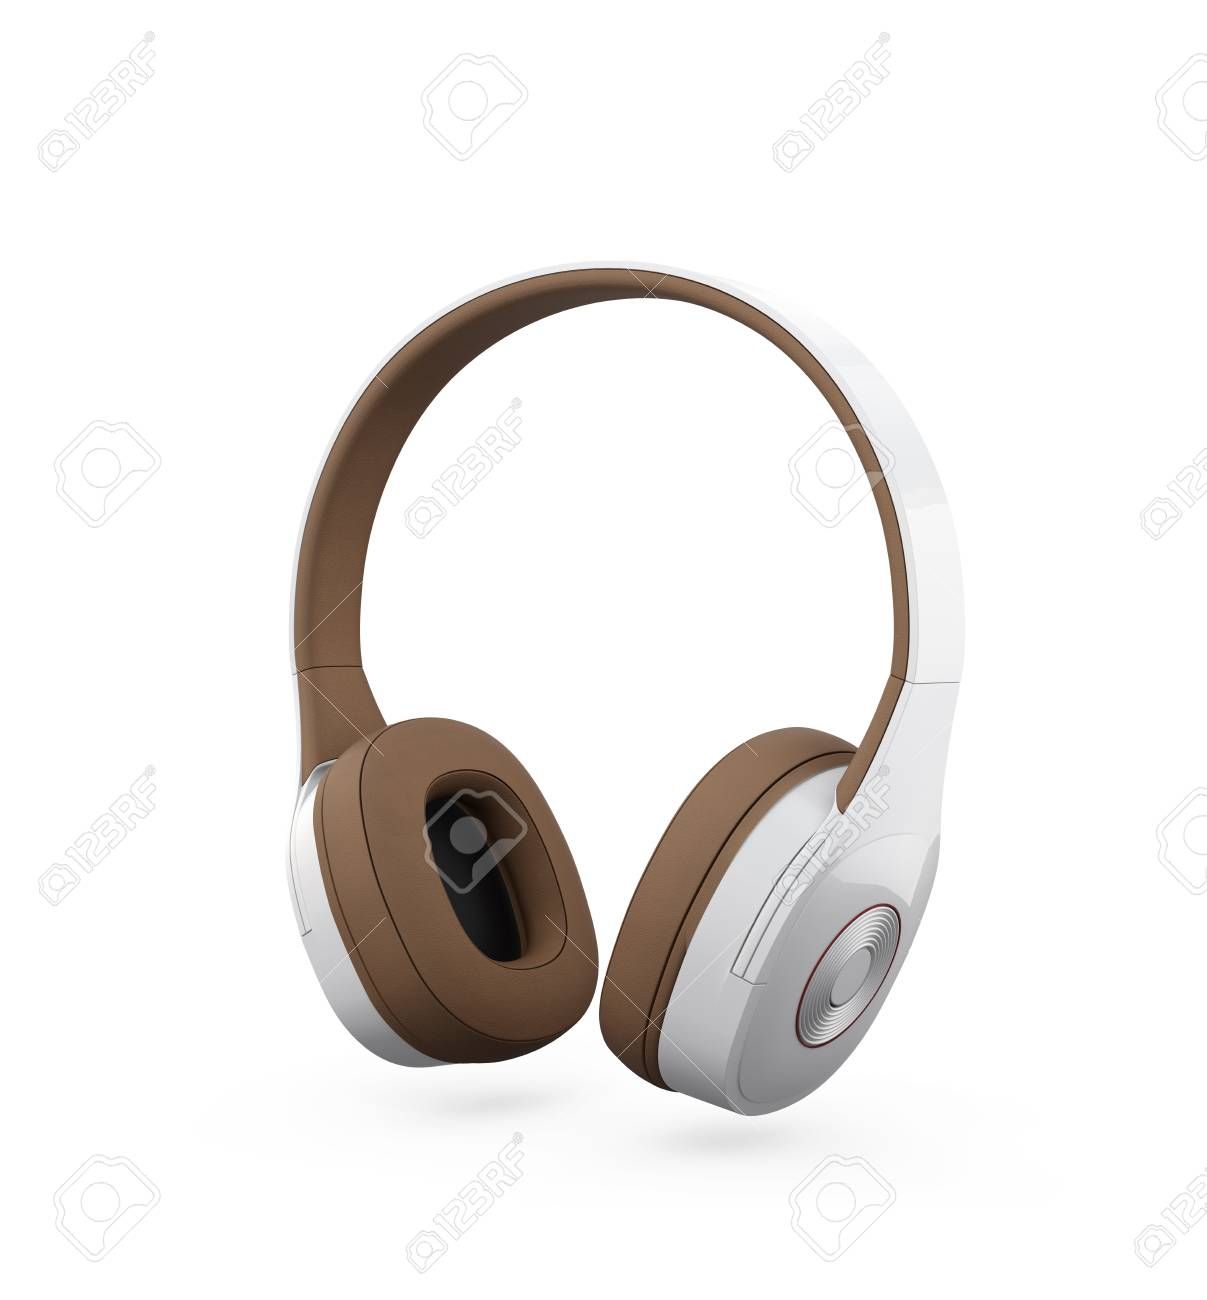 White Headphone Isolated On Background 3d Rendering Image